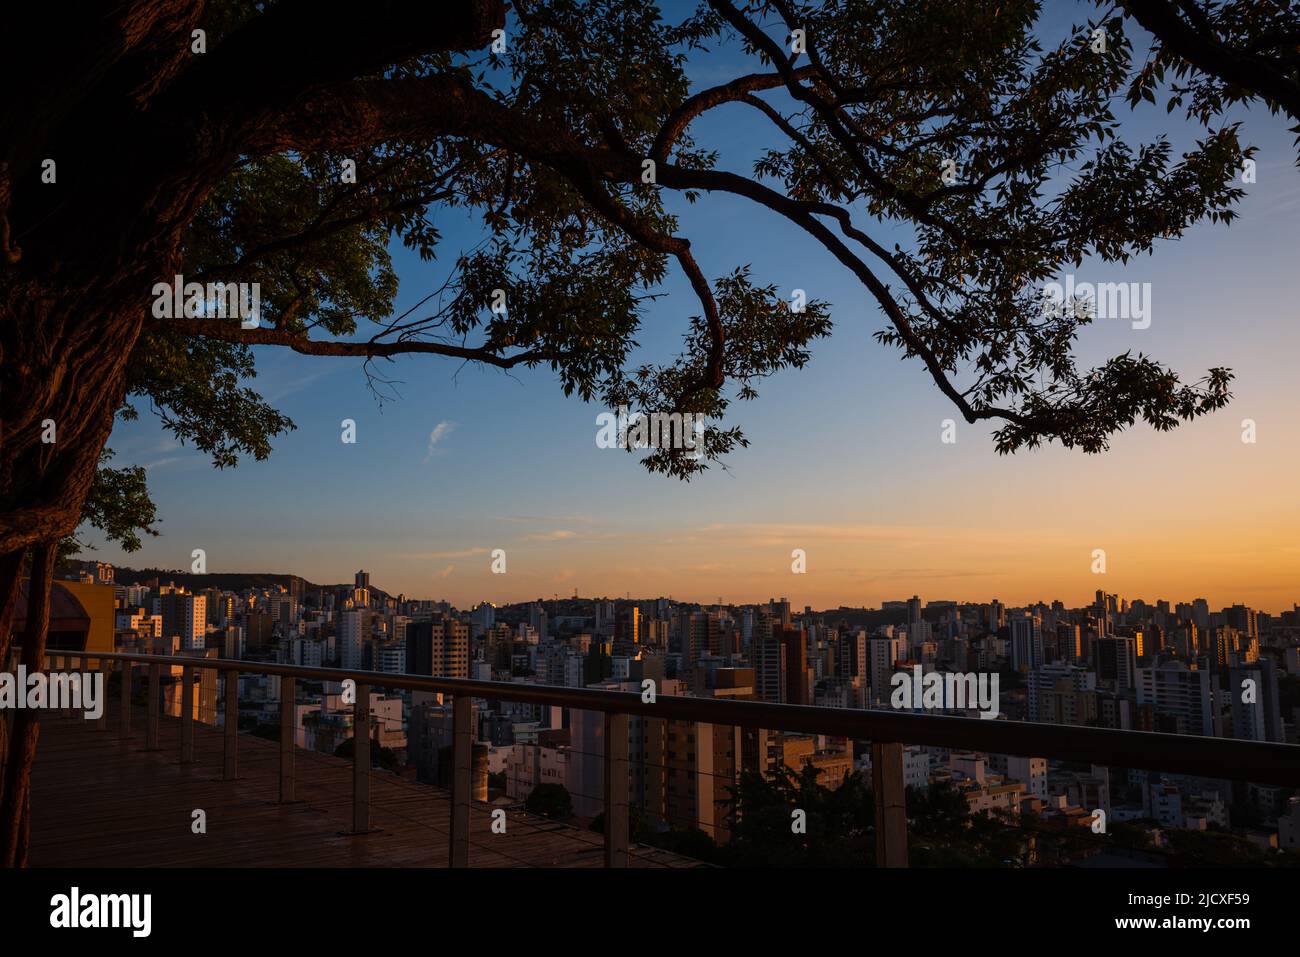 Tree over deck and sunset city view at Parque Amilcar Vianna Martins in Belo Horizonte, Brazil. Stock Photo